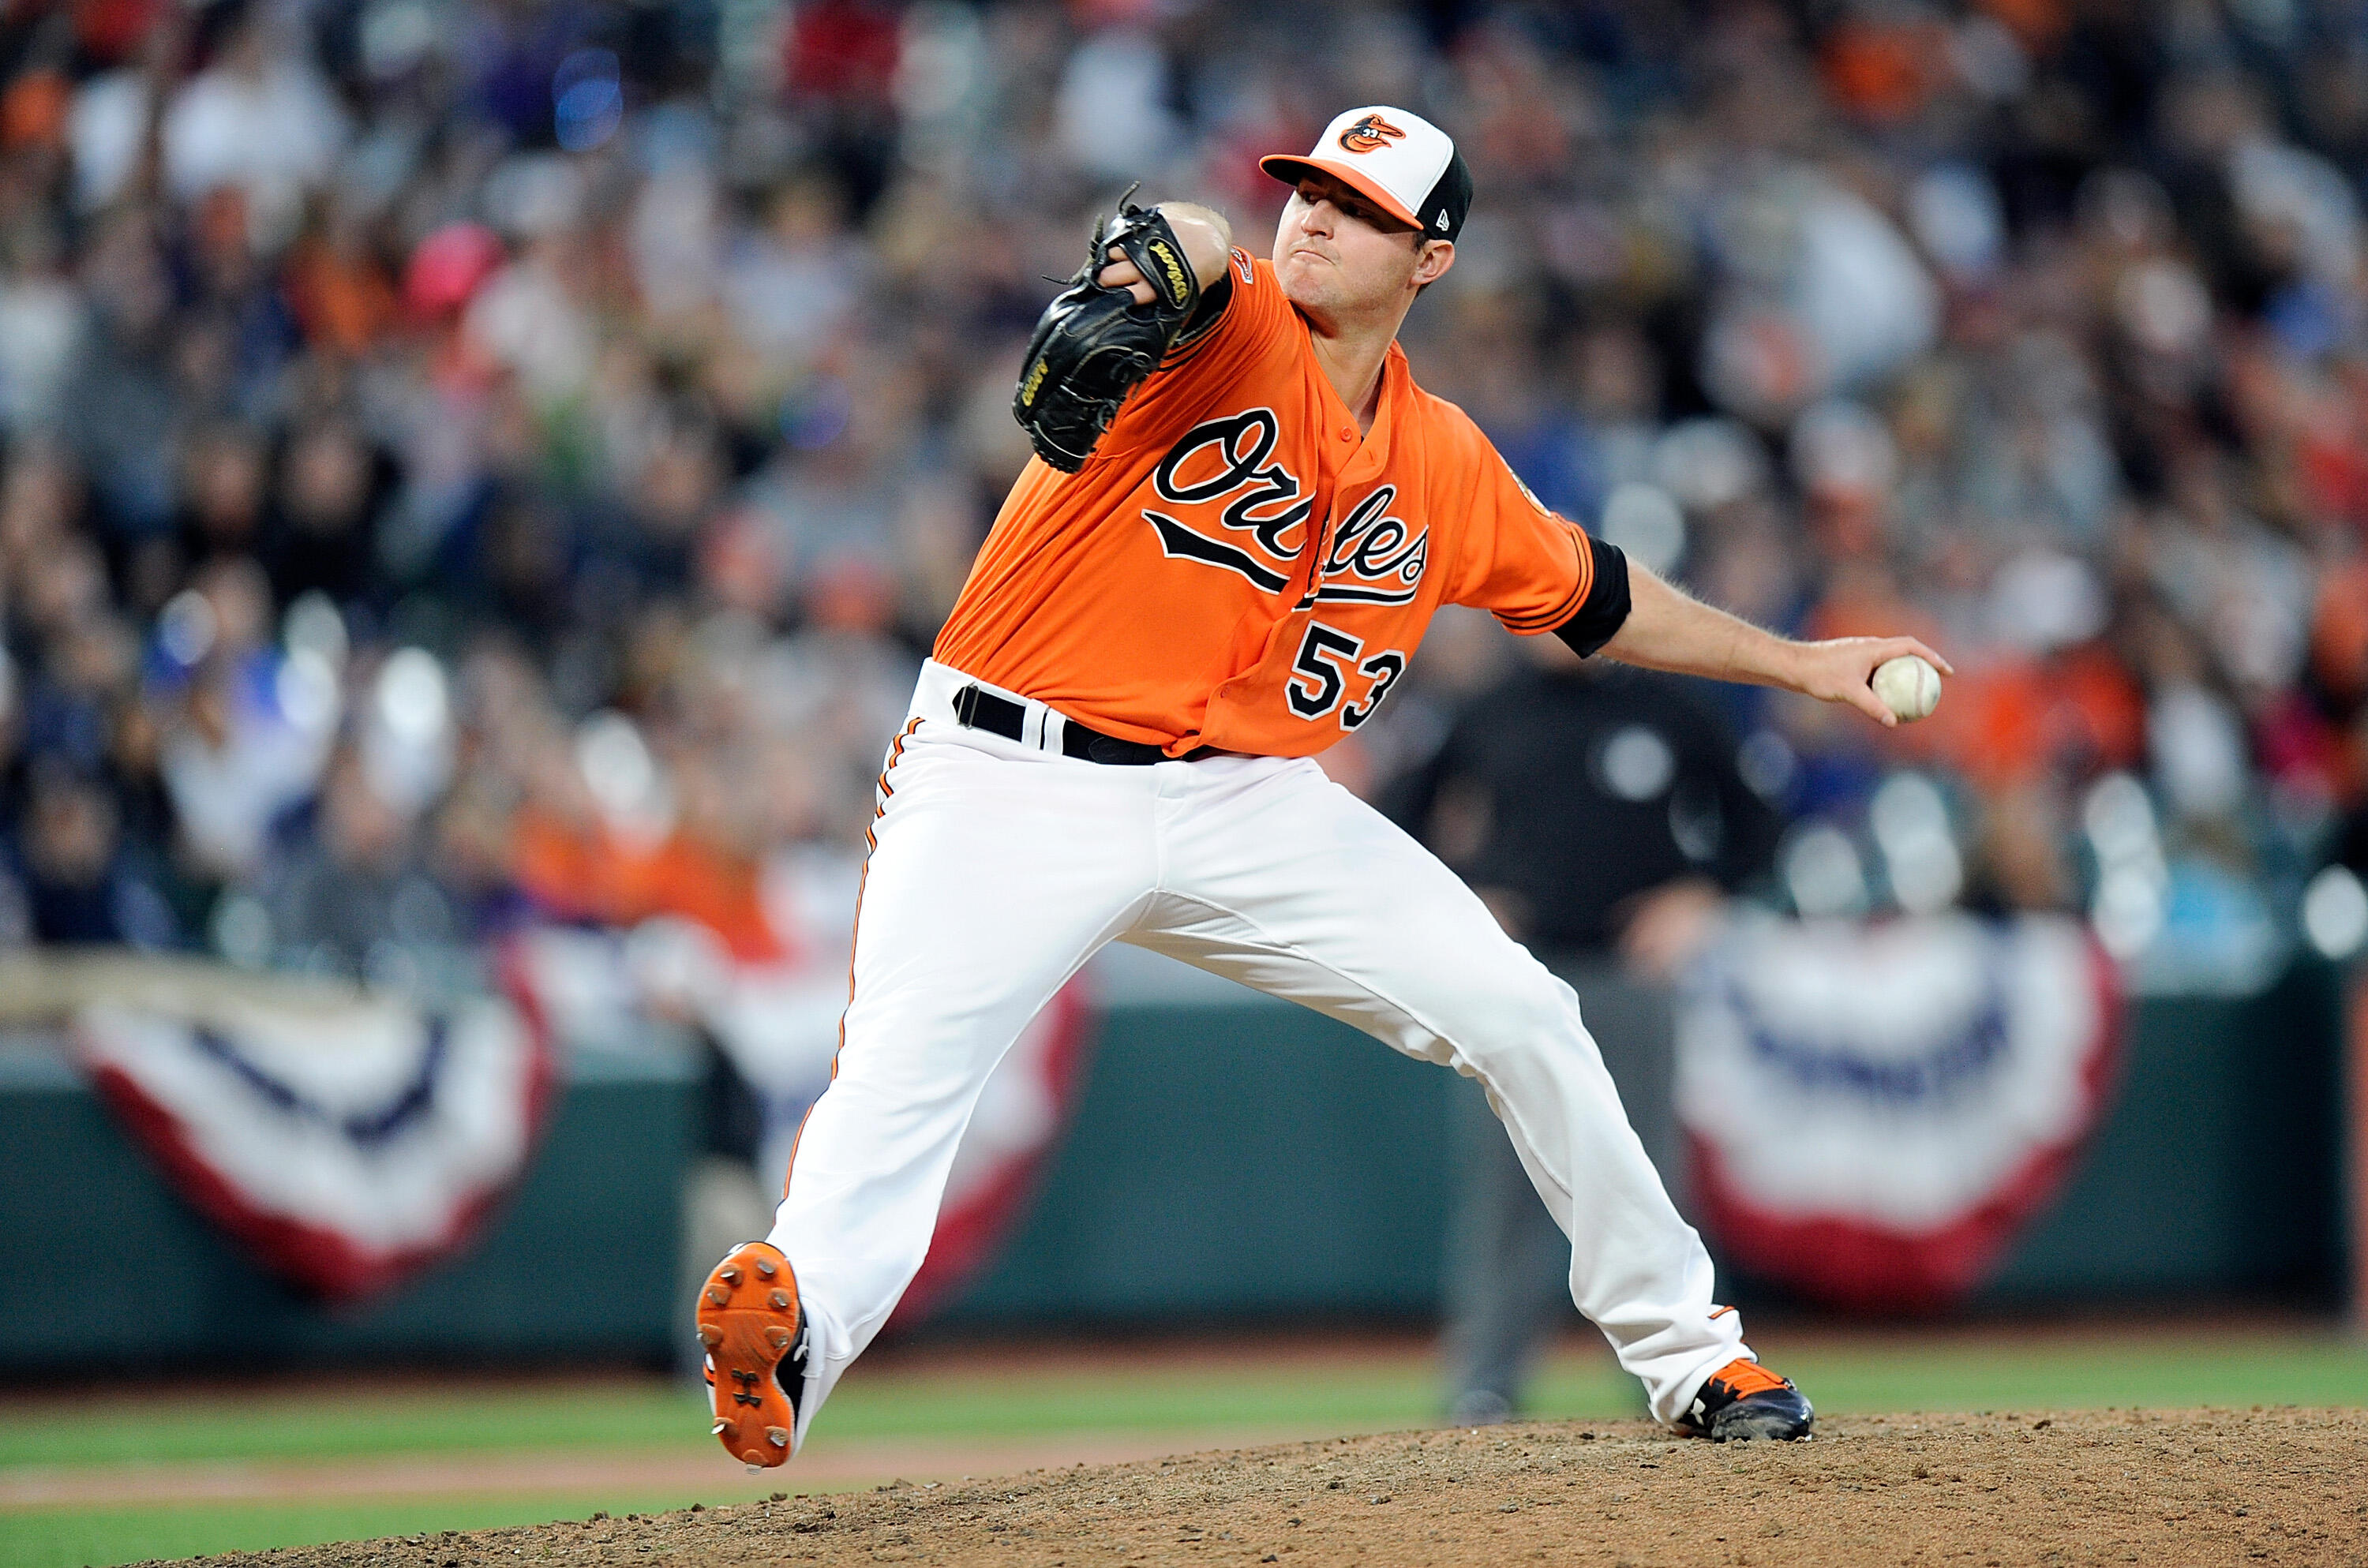 BALTIMORE, MD - APRIL 08:  Zach Britton #53 of the Baltimore Orioles pitches in the ninth inning against the New York Yankees at Oriole Park at Camden Yards on April 8, 2017 in Baltimore, Maryland. Baltimore won the game 5-4. (Photo by Greg Fiume/Getty Im